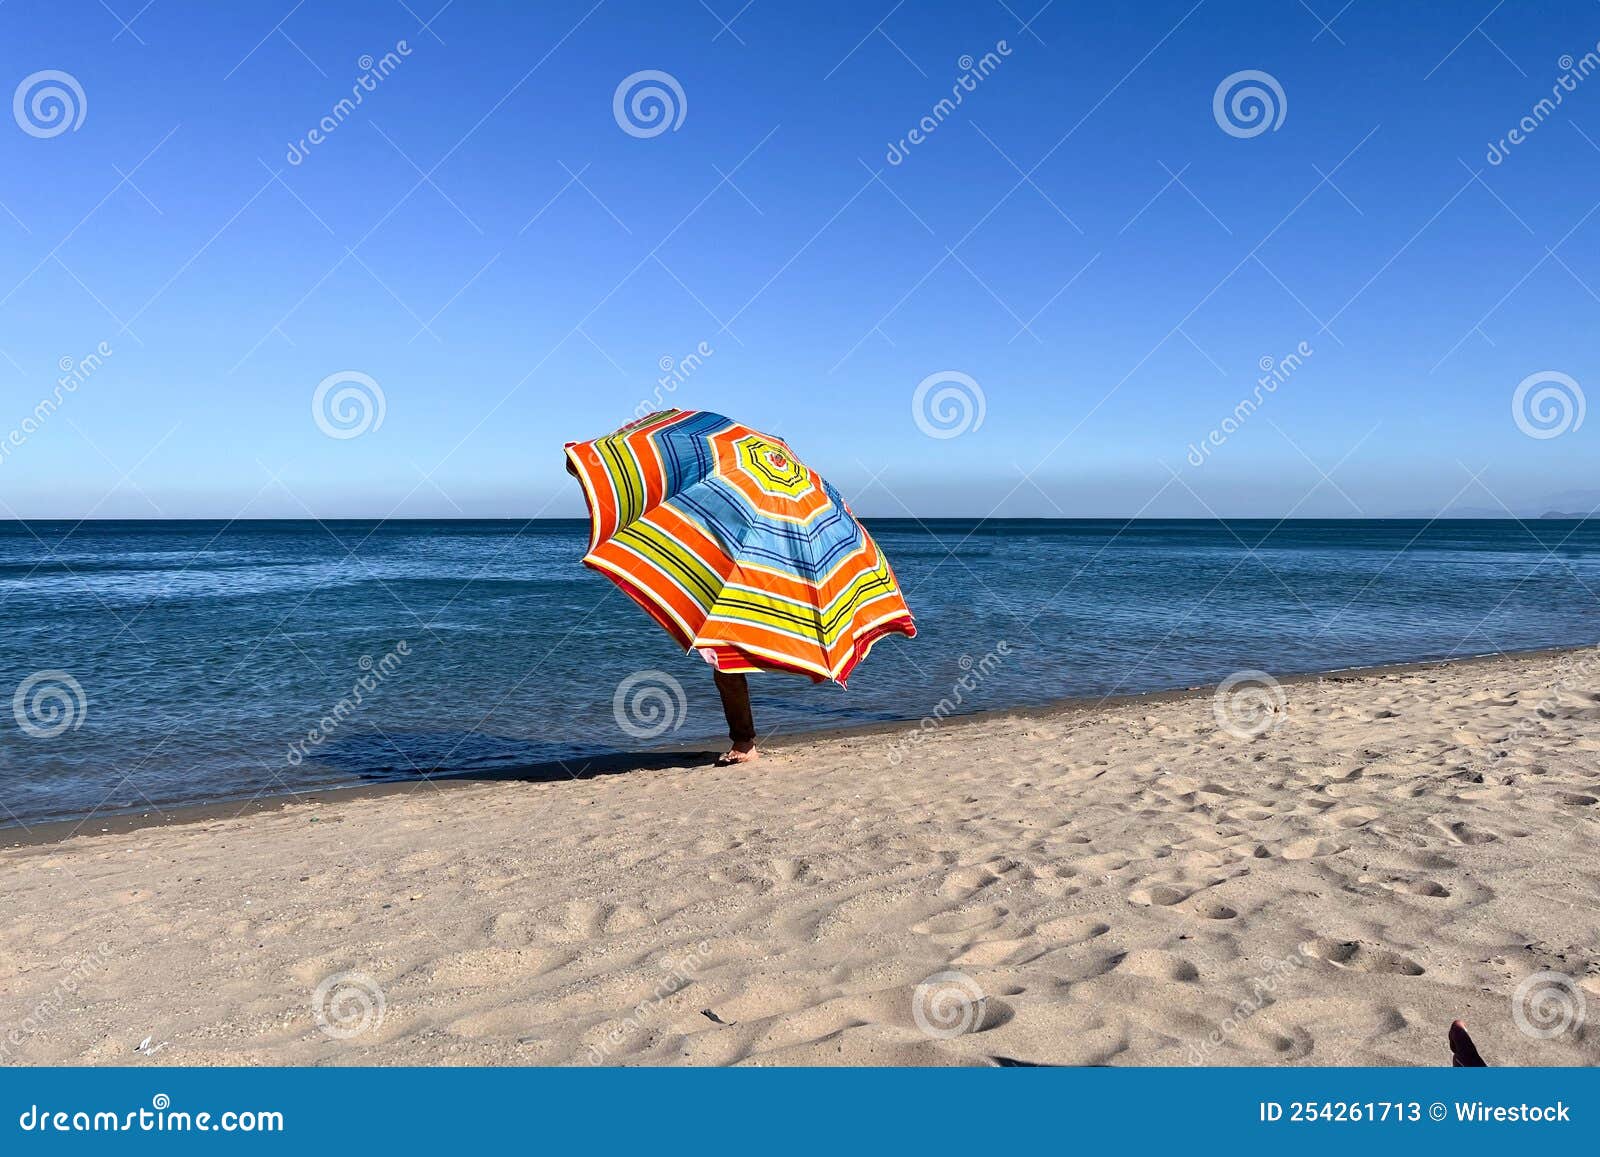 A Man Holding an Open Parasol on the Beach Stock Image - Image of adult ...